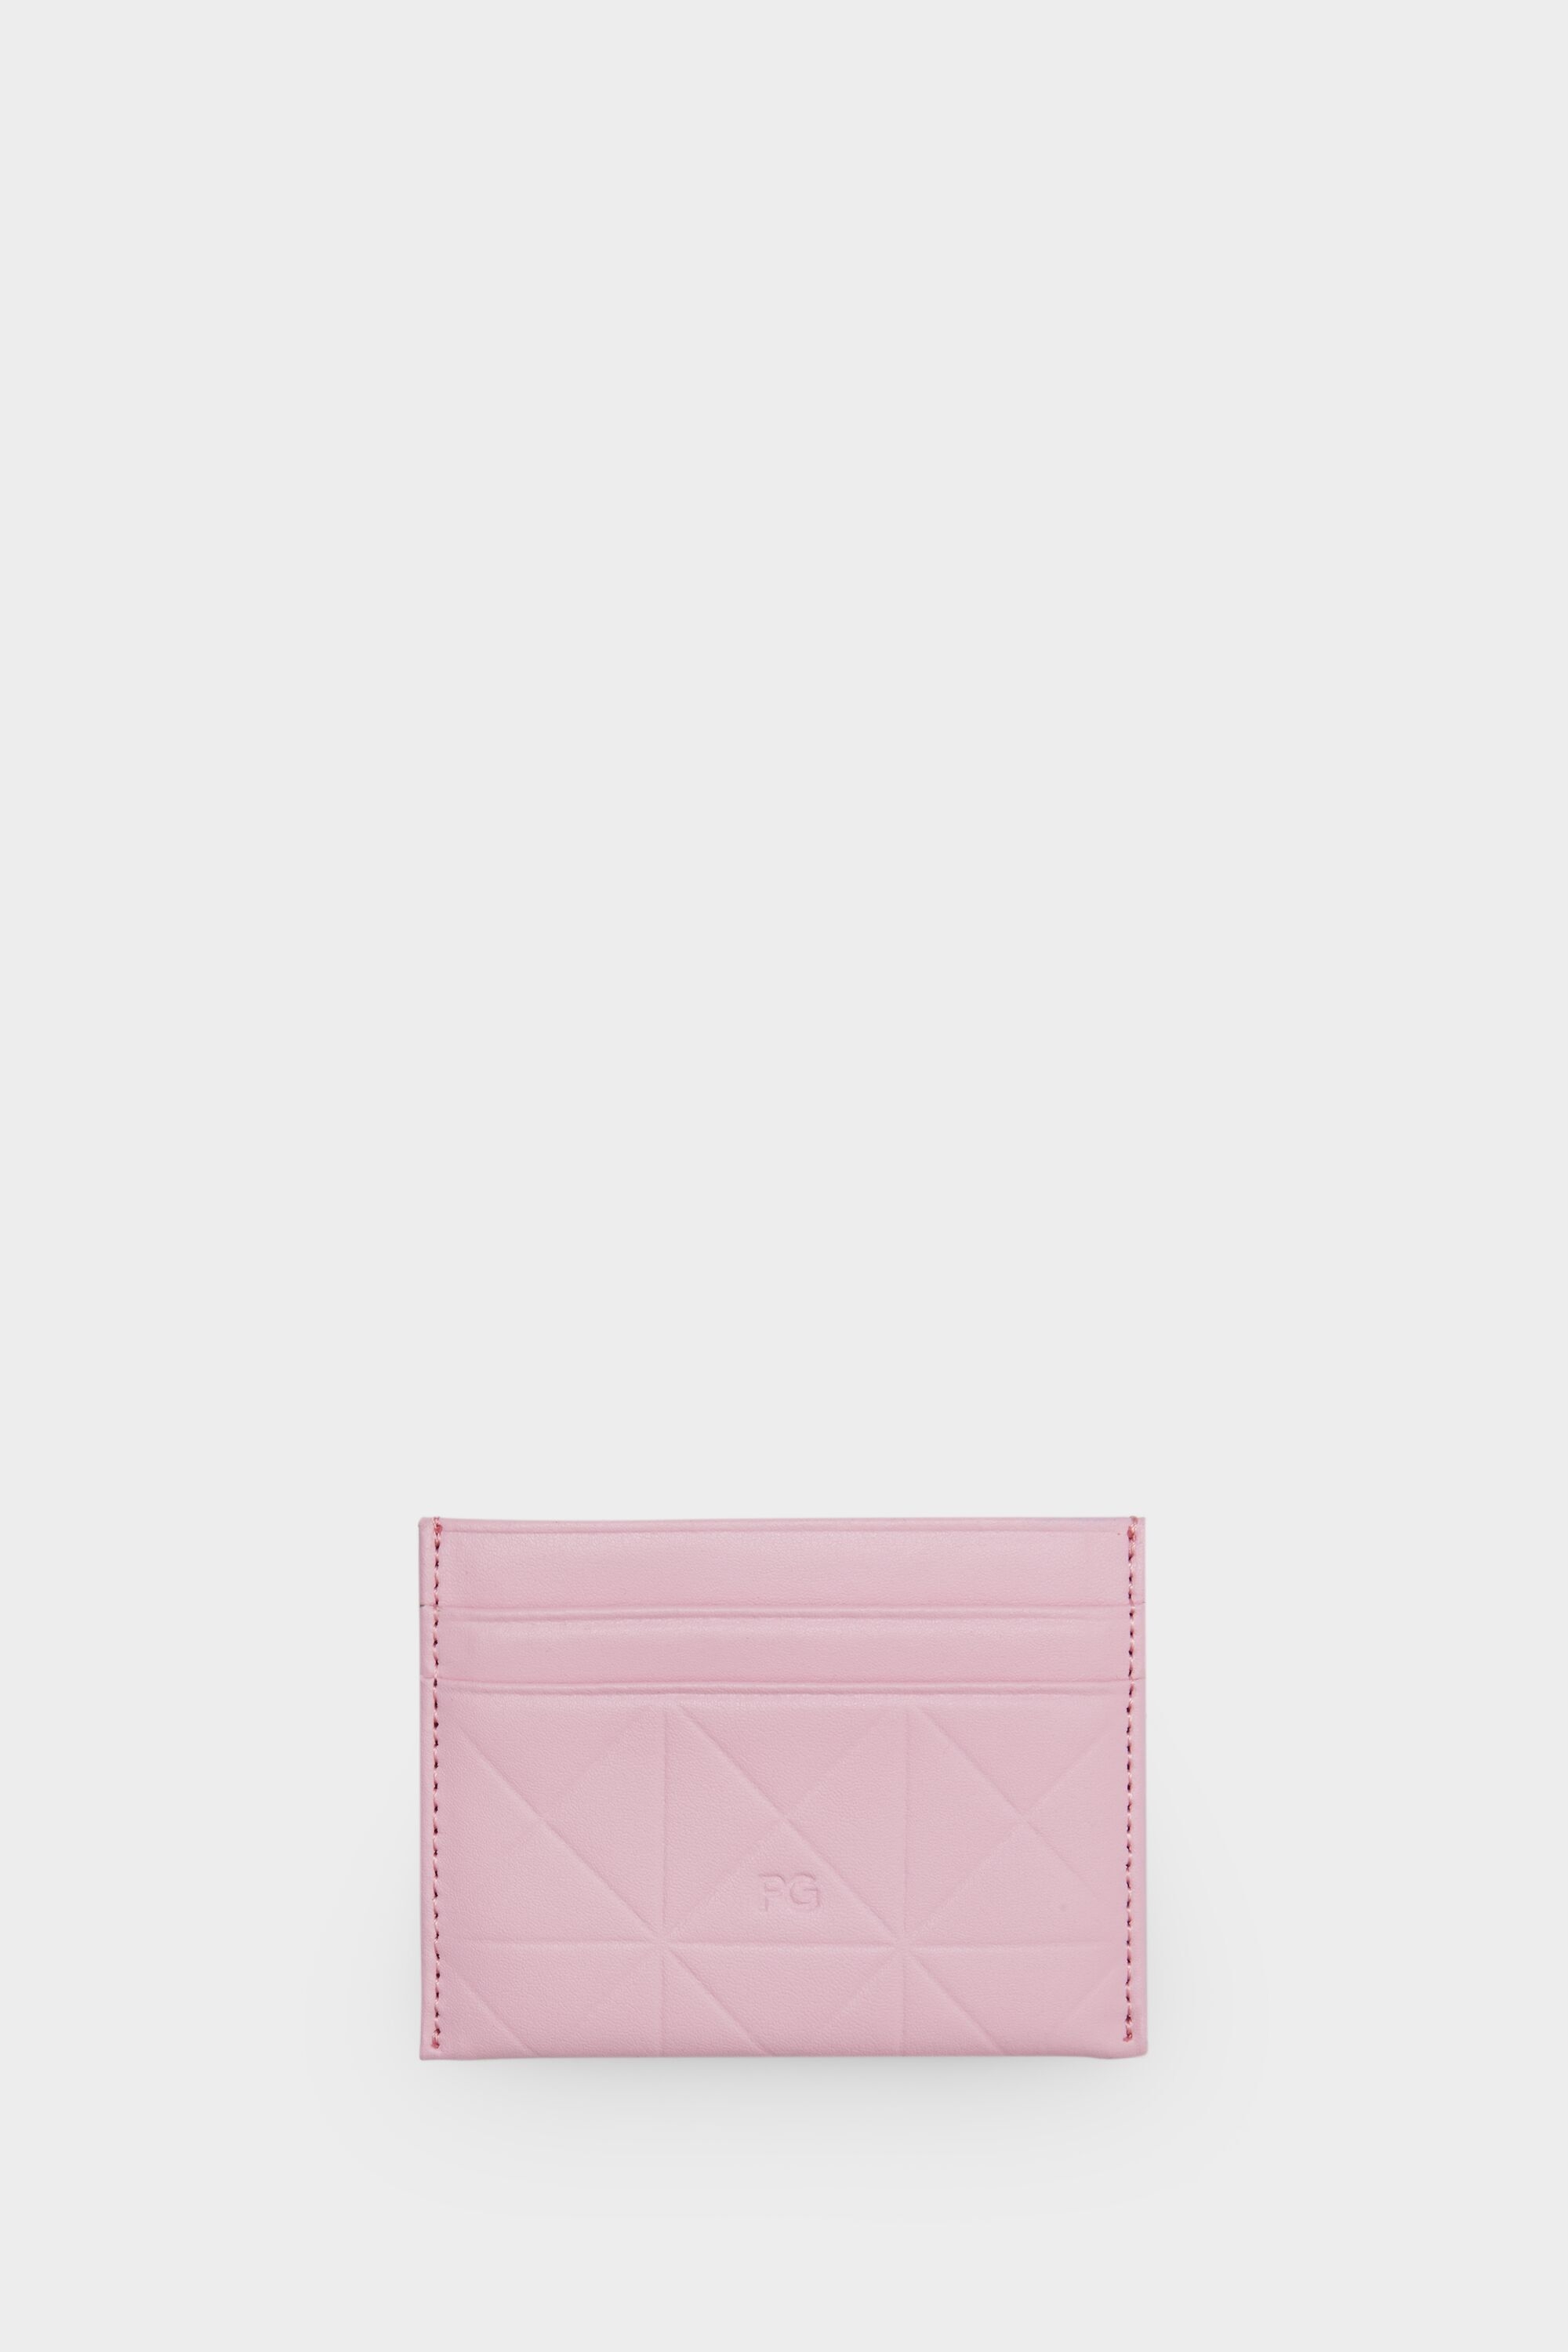 PG cube leather card holder